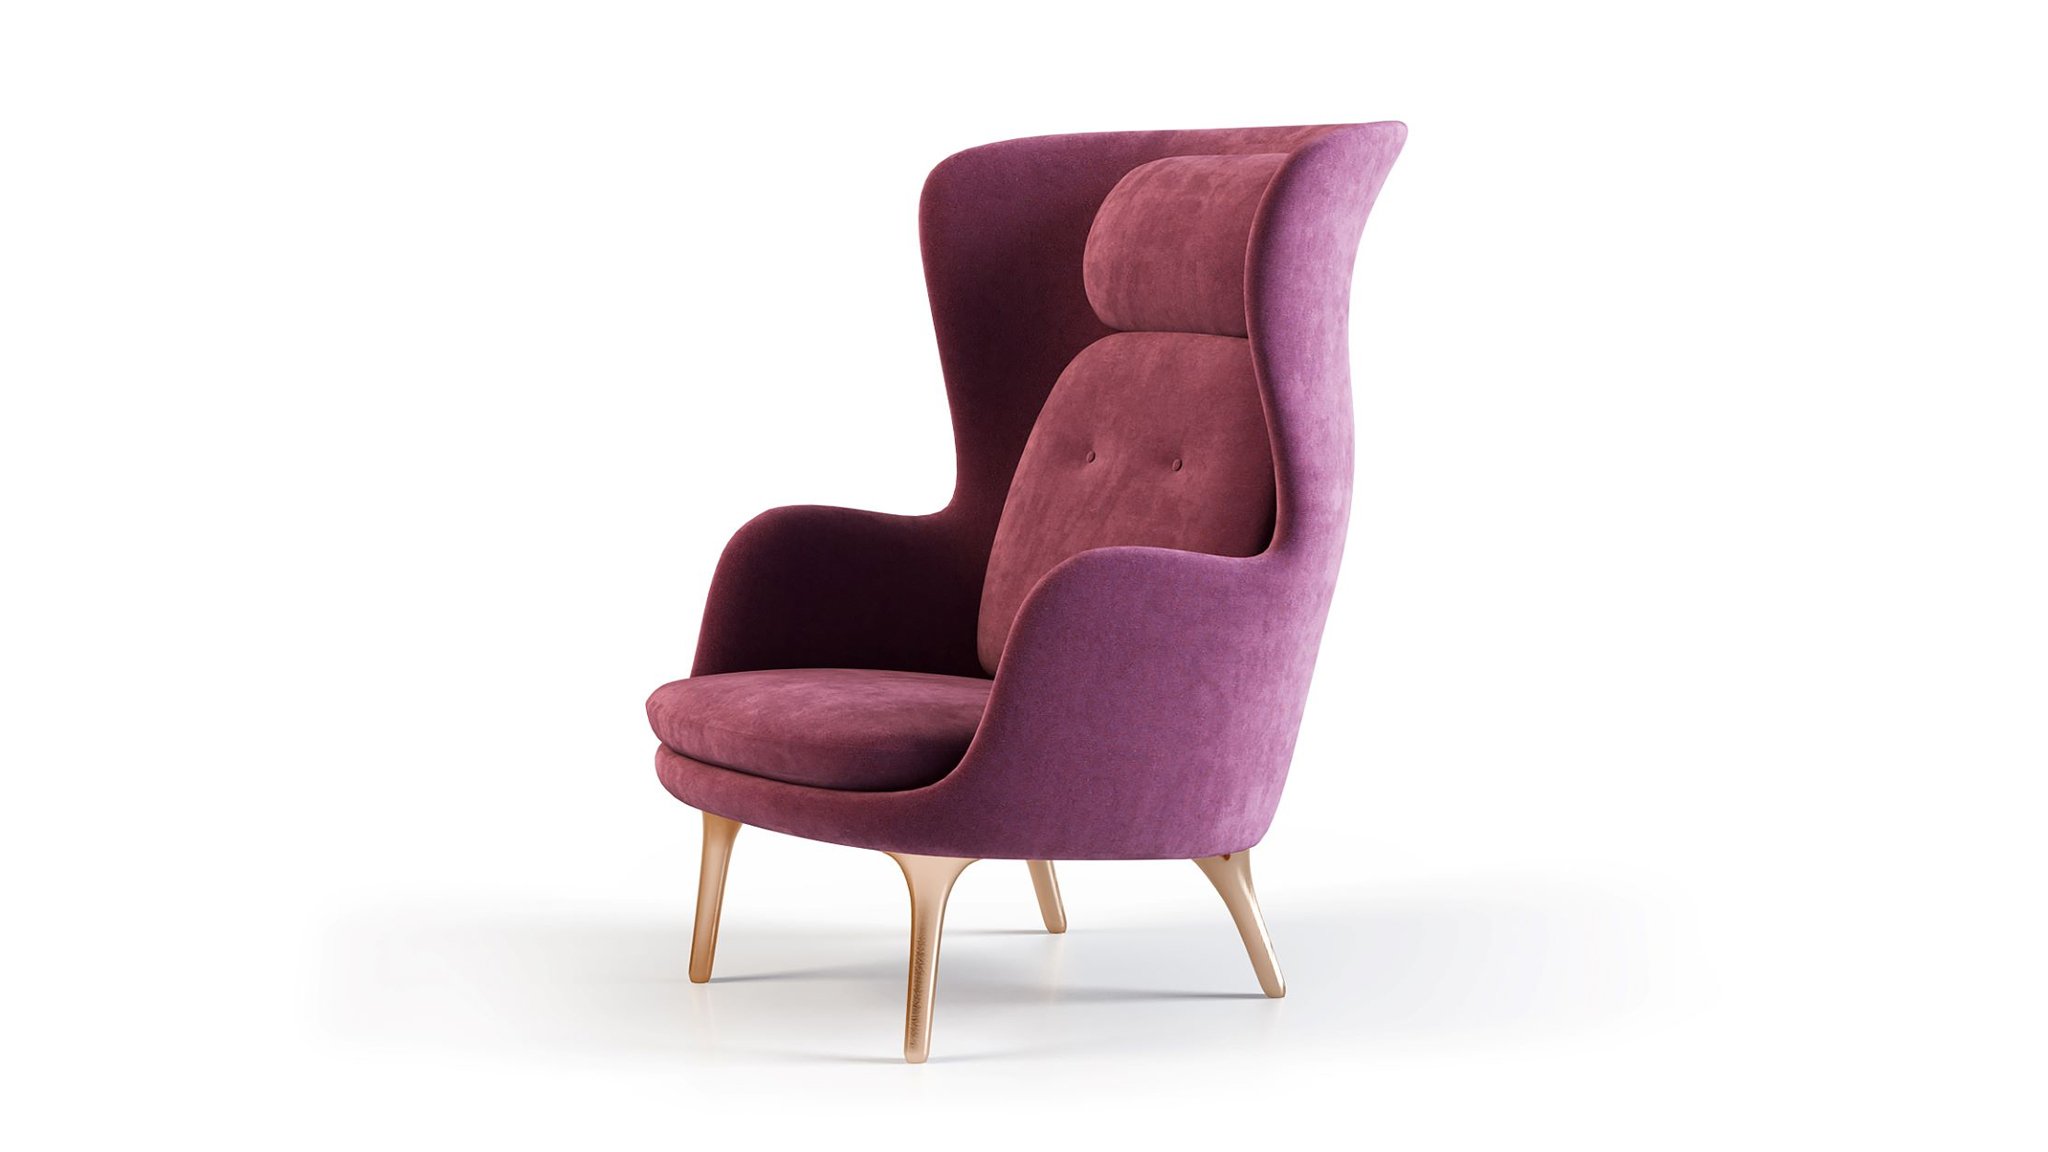 Silo 3D Product Image for a Classy Chair